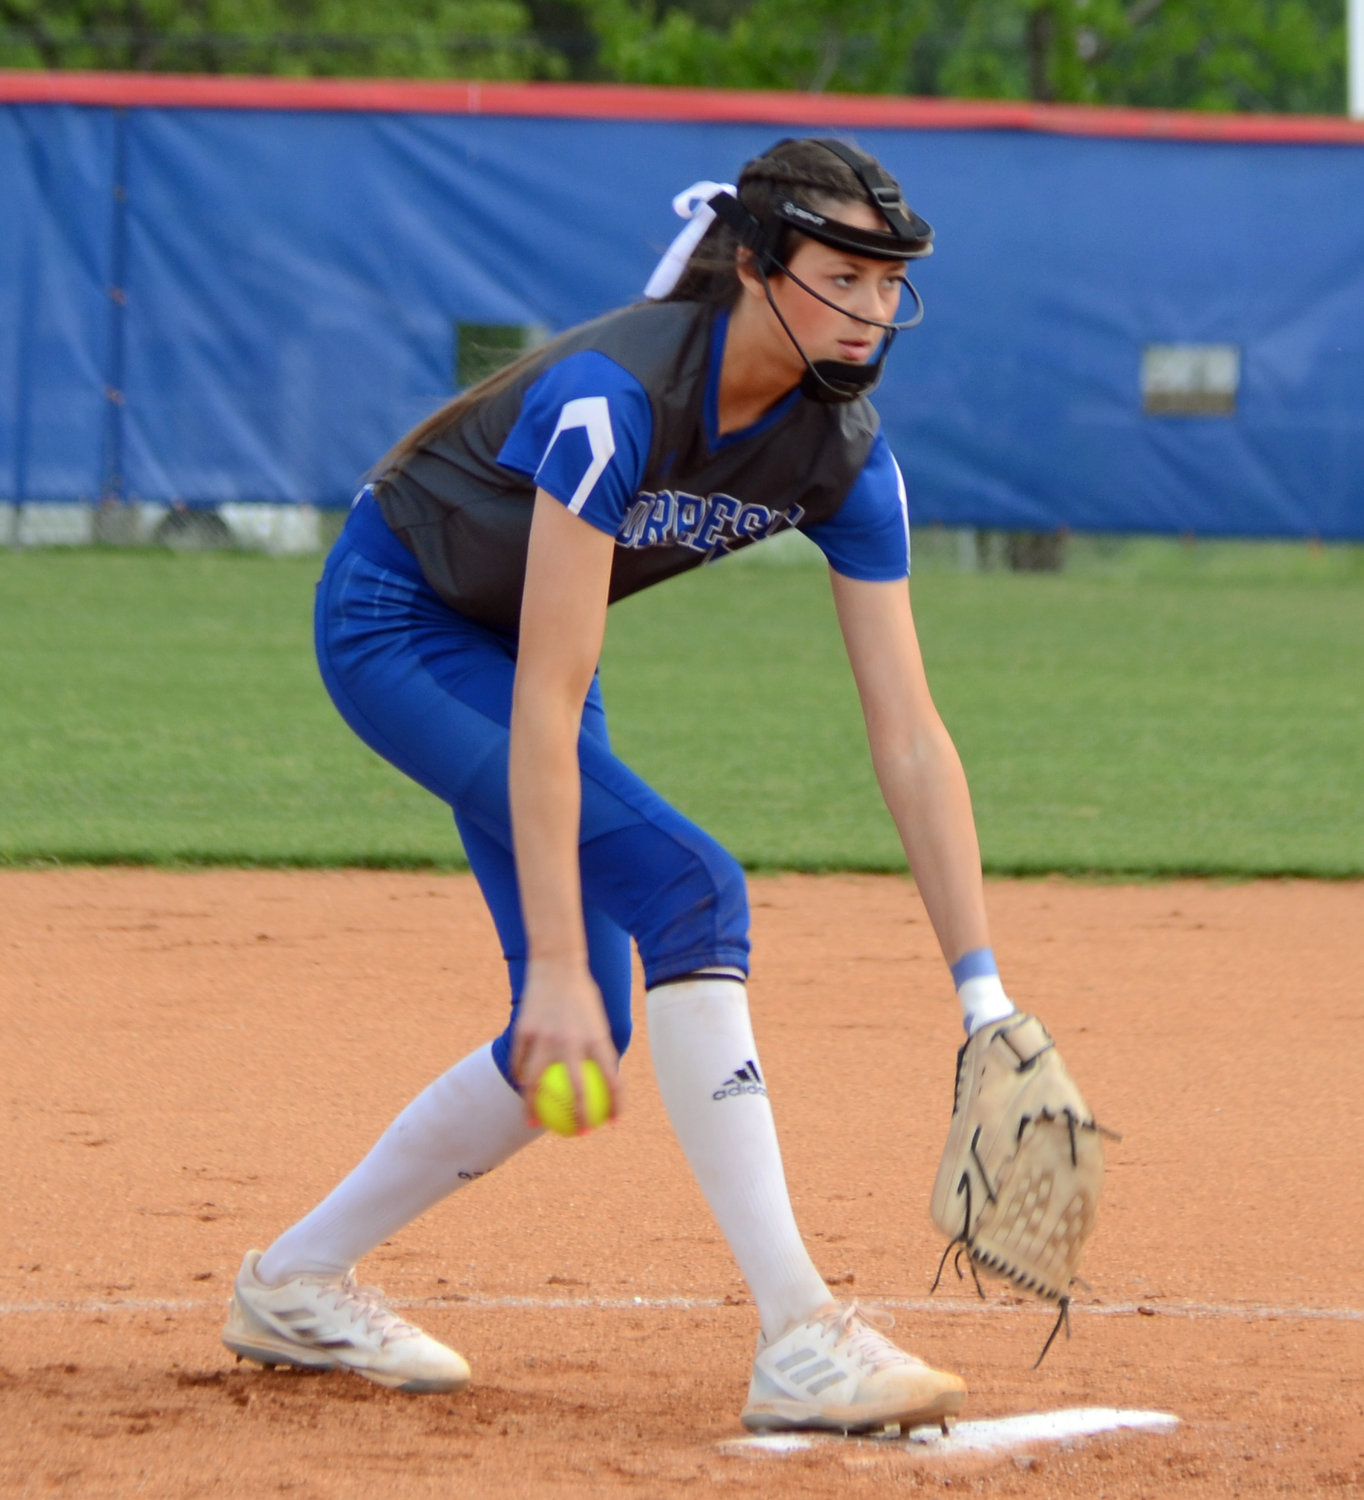 Freshman Ella Chilton turned in a strong performance in the circle in Wednesday night’s 11-1 win over Rockvale in the regular season finale at the Field of Dreams in Chapel Hill.